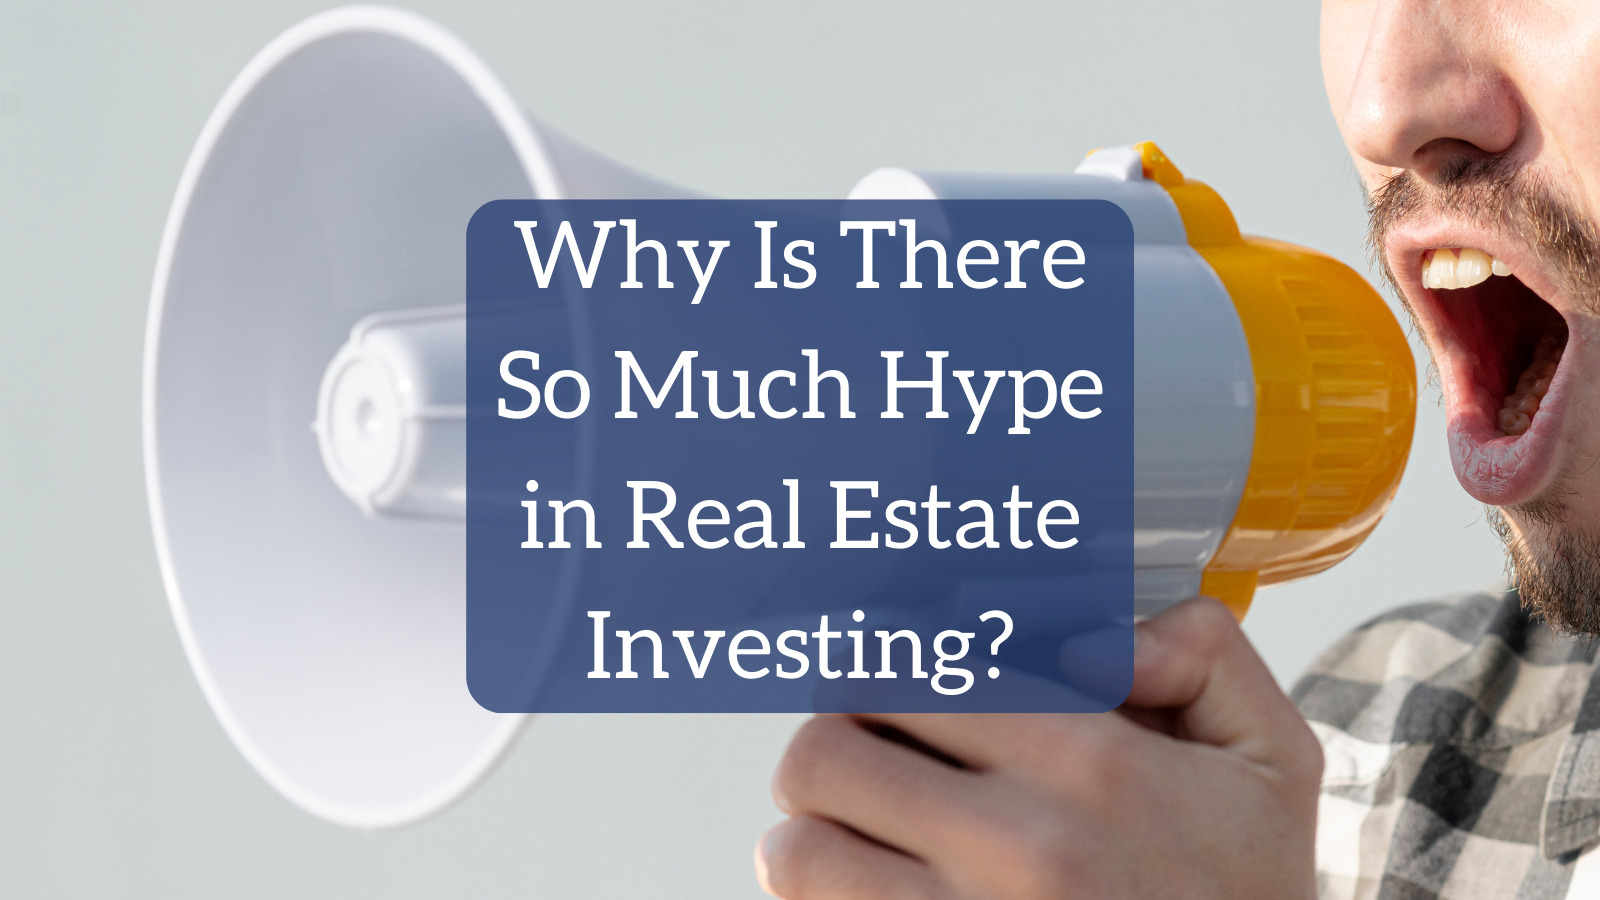 Why is there so much hype in real estate investing?